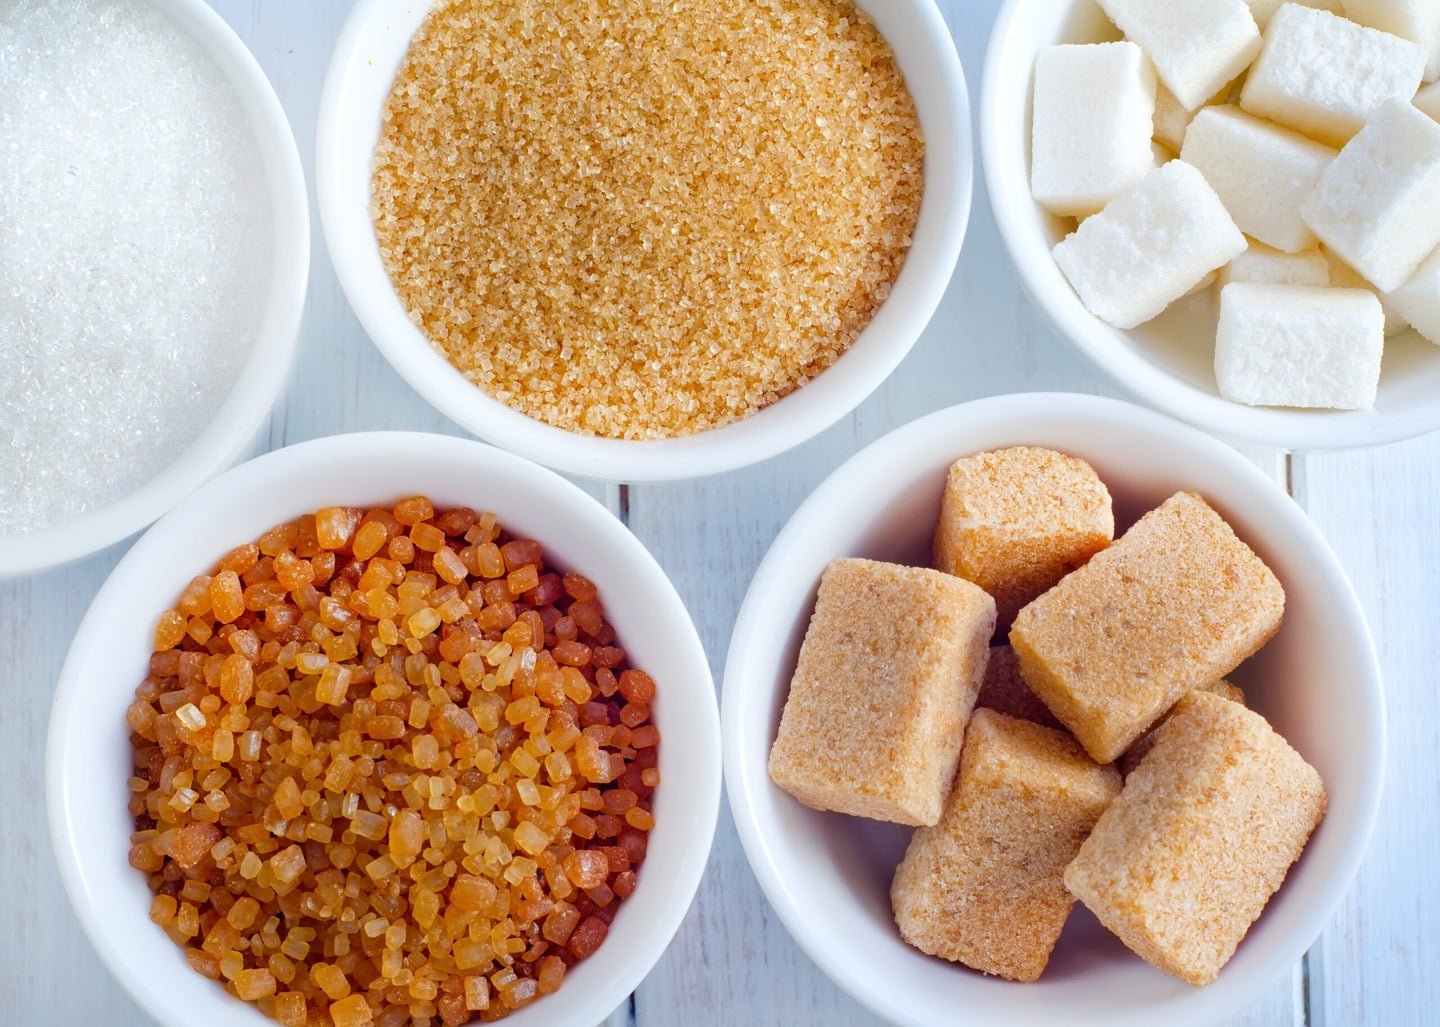 High-fructose corn syrup vs. sugar: Which is actually worse?